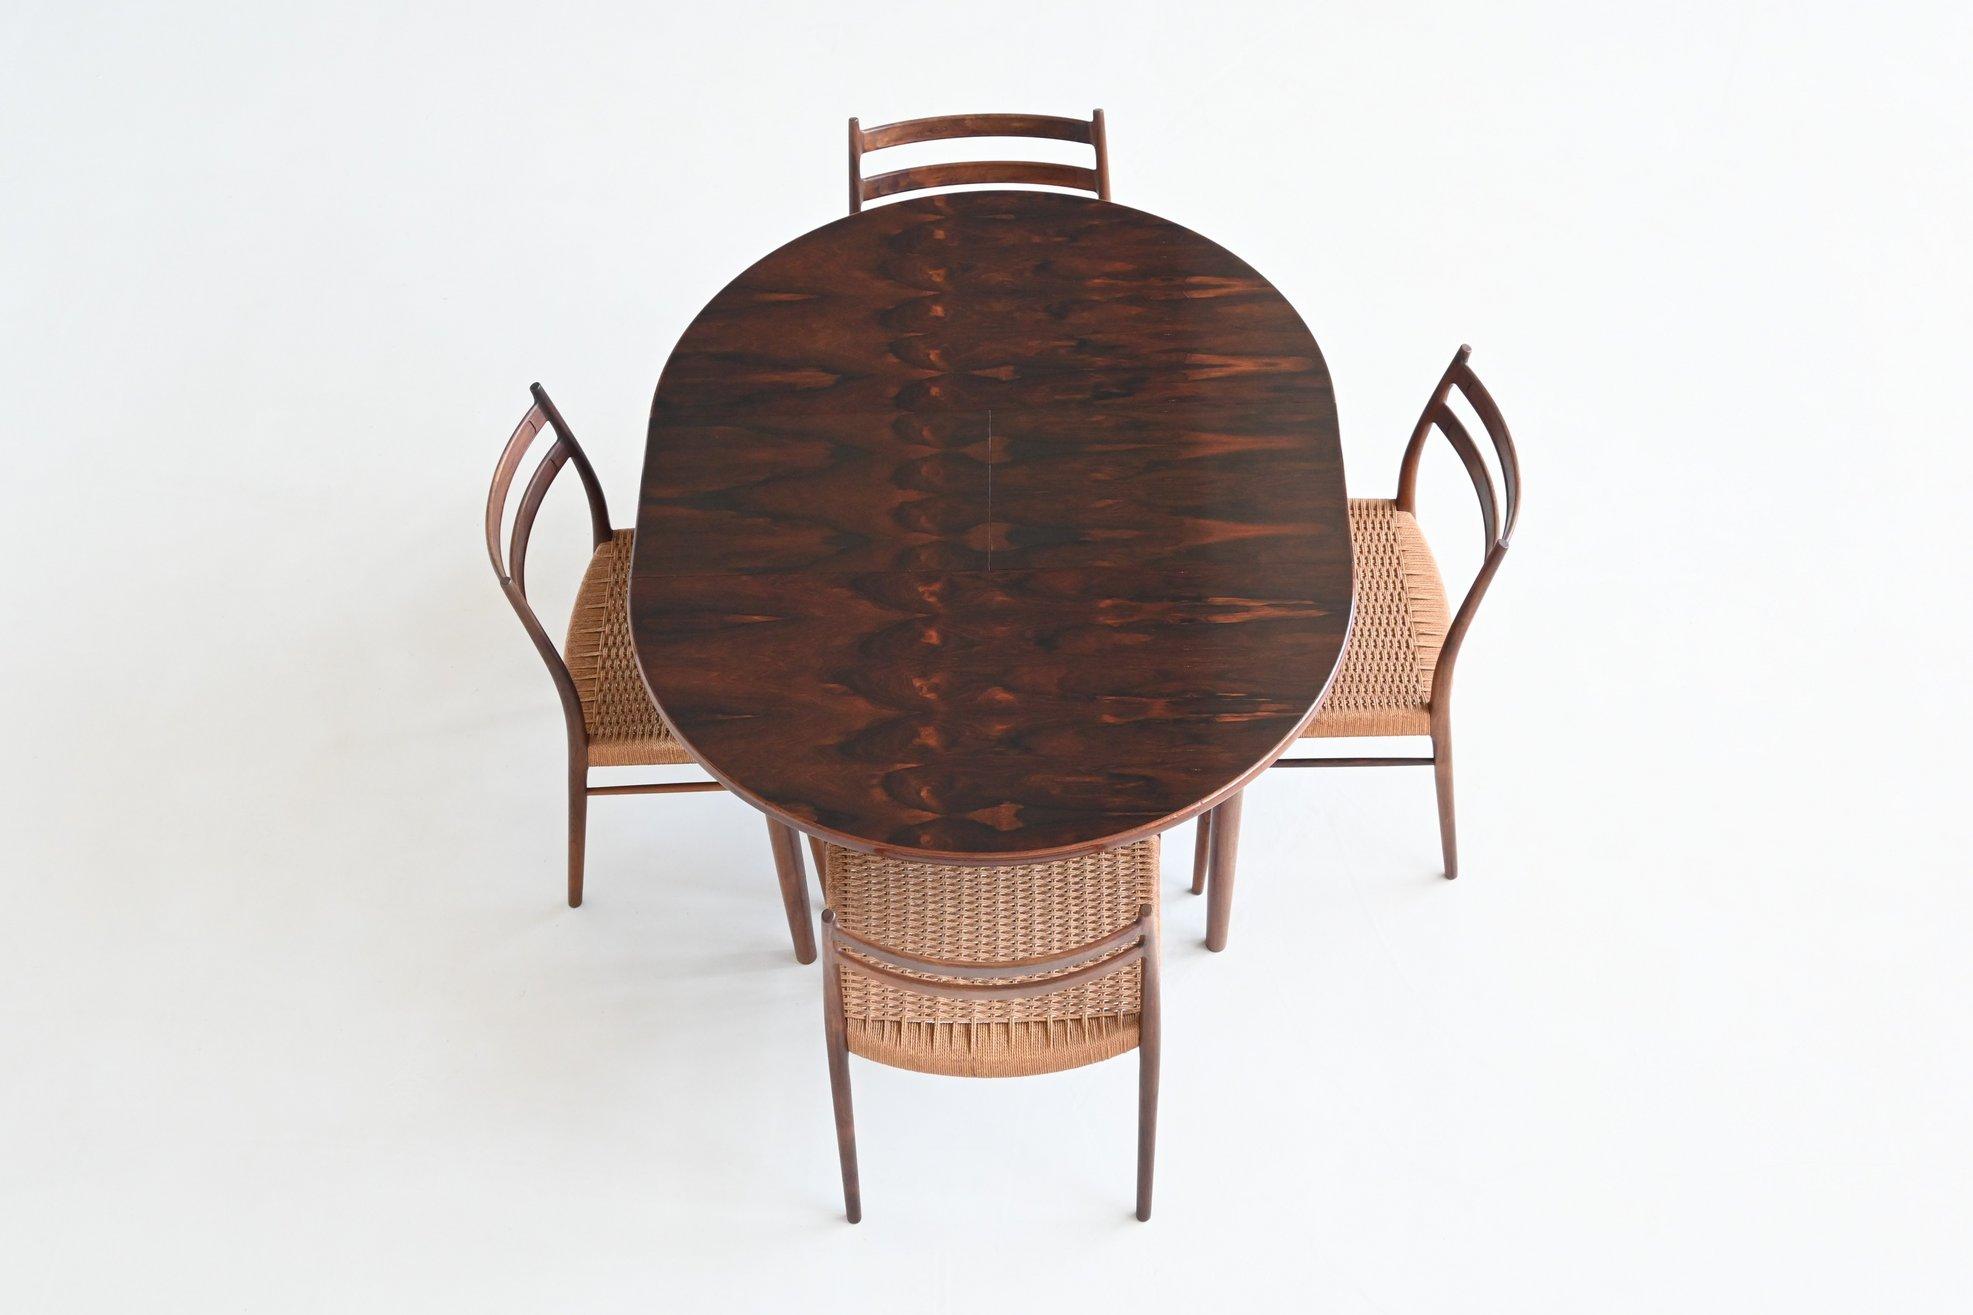 Beautiful oval shaped hardwood extendable dining table by unknown designer or manufacturer, Denmark 1960. This well-crafted table is made of amazingly grained and warm hardwood. The tapered legs are made of solid hardwood and could be dismantled